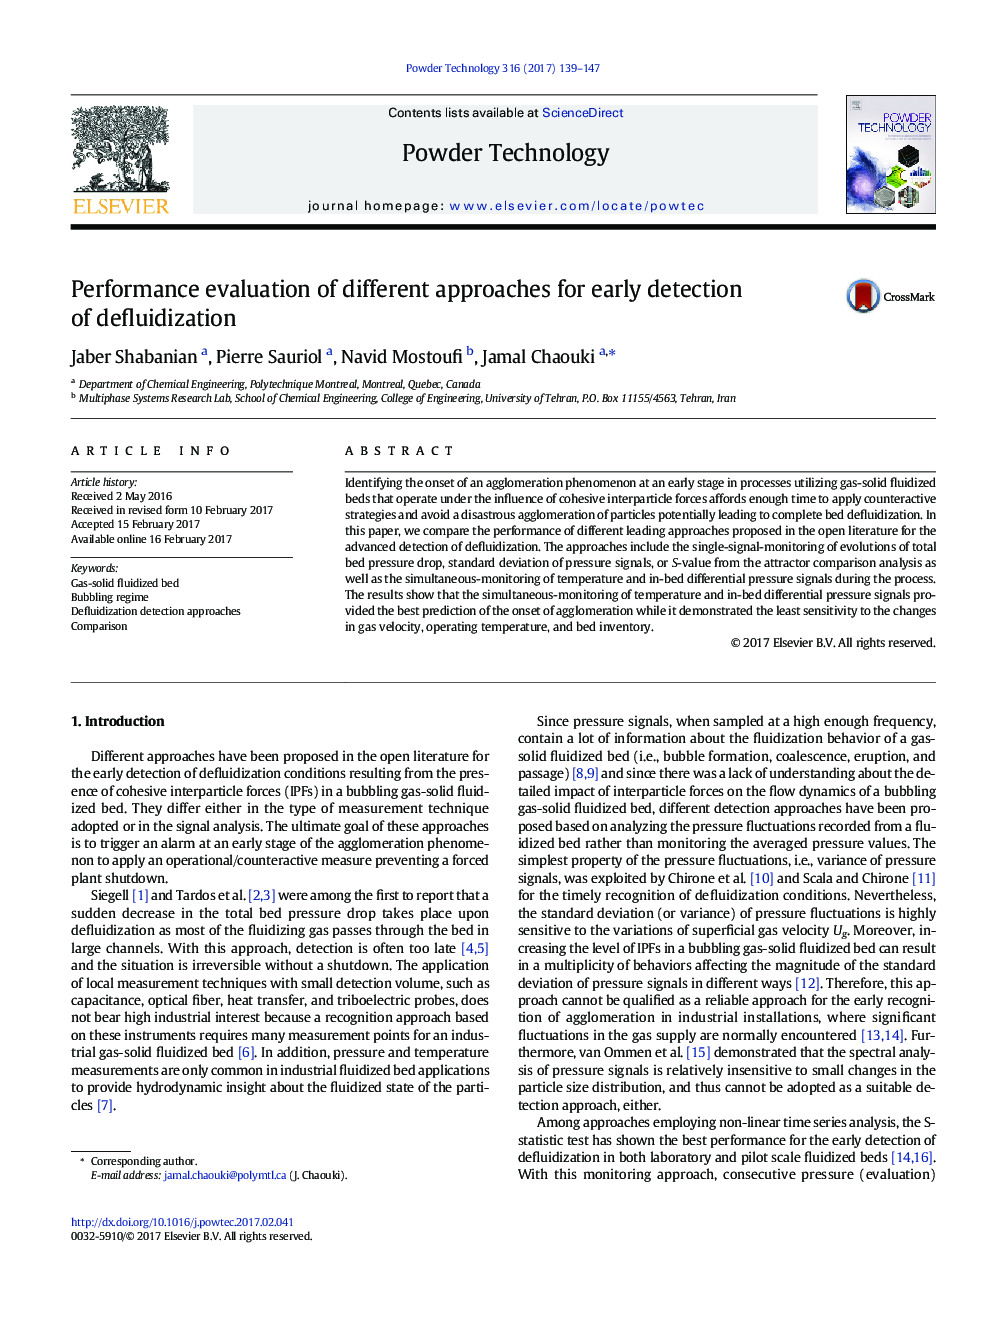 Performance evaluation of different approaches for early detection of defluidization